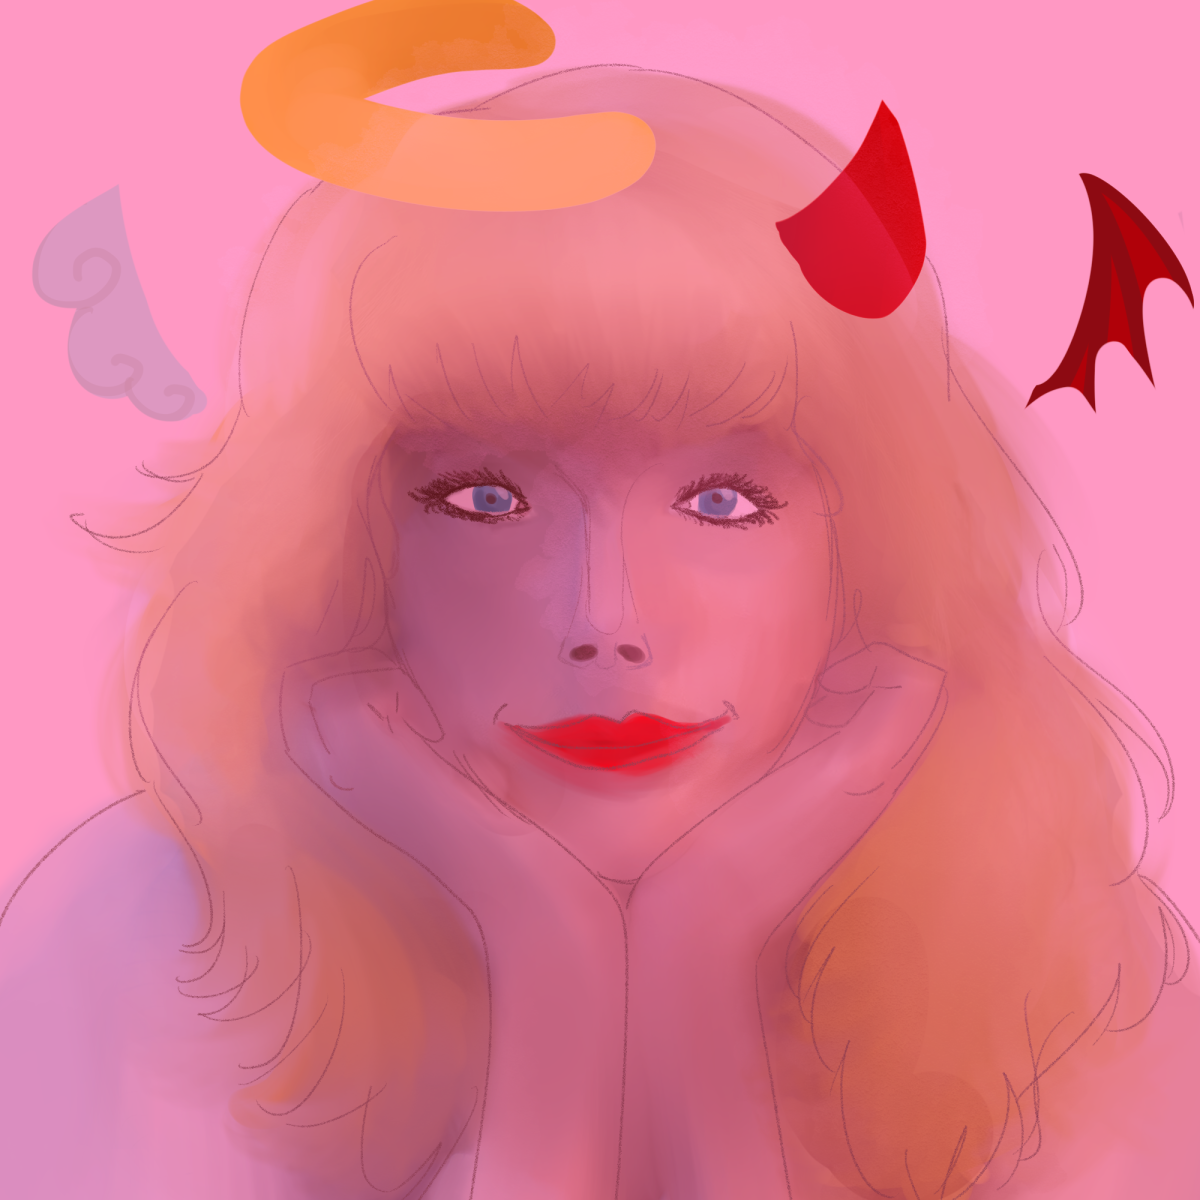 Taylor+swift+if+she+was+heavenly+color+edition